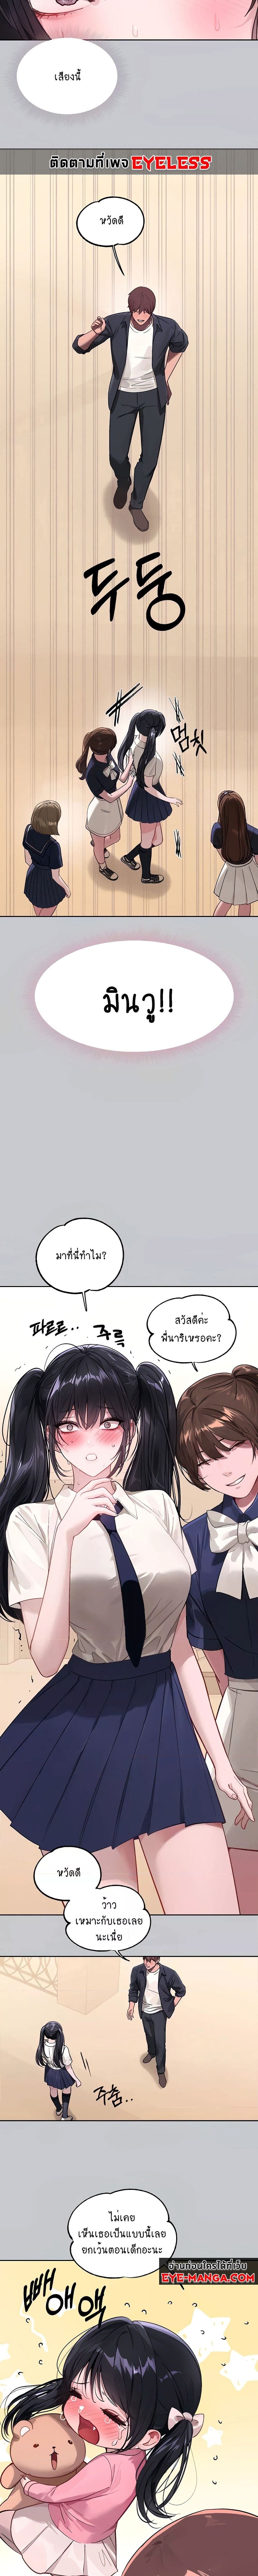 The Owner Of A Building ตอนที่ 96 ภาพ 1